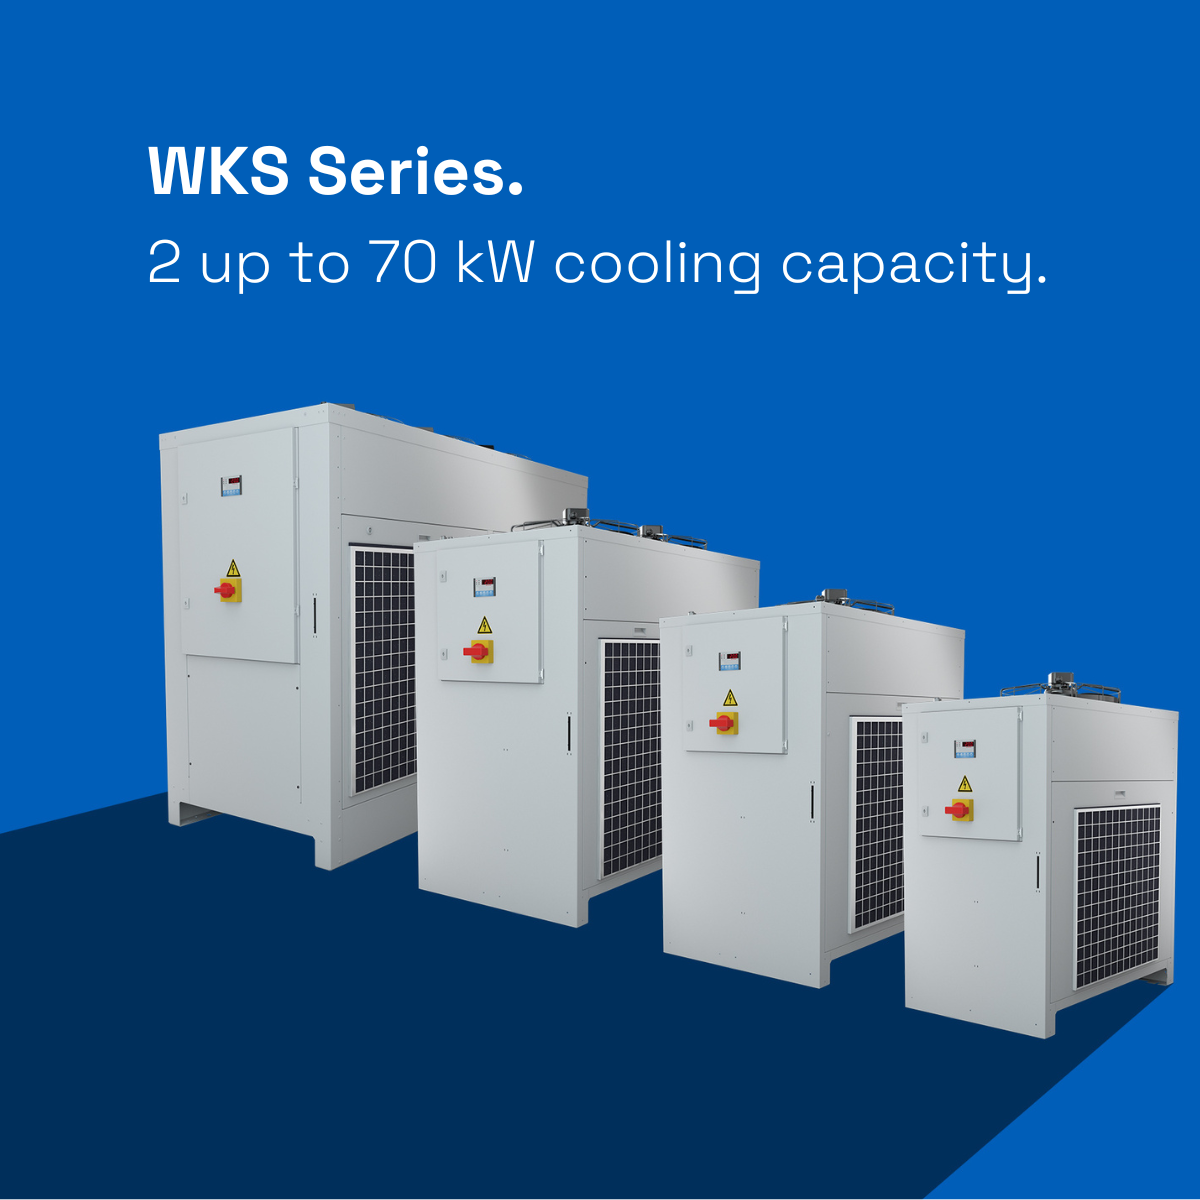 WKS series. Cooling capacities from 2 kW to 70 kW.